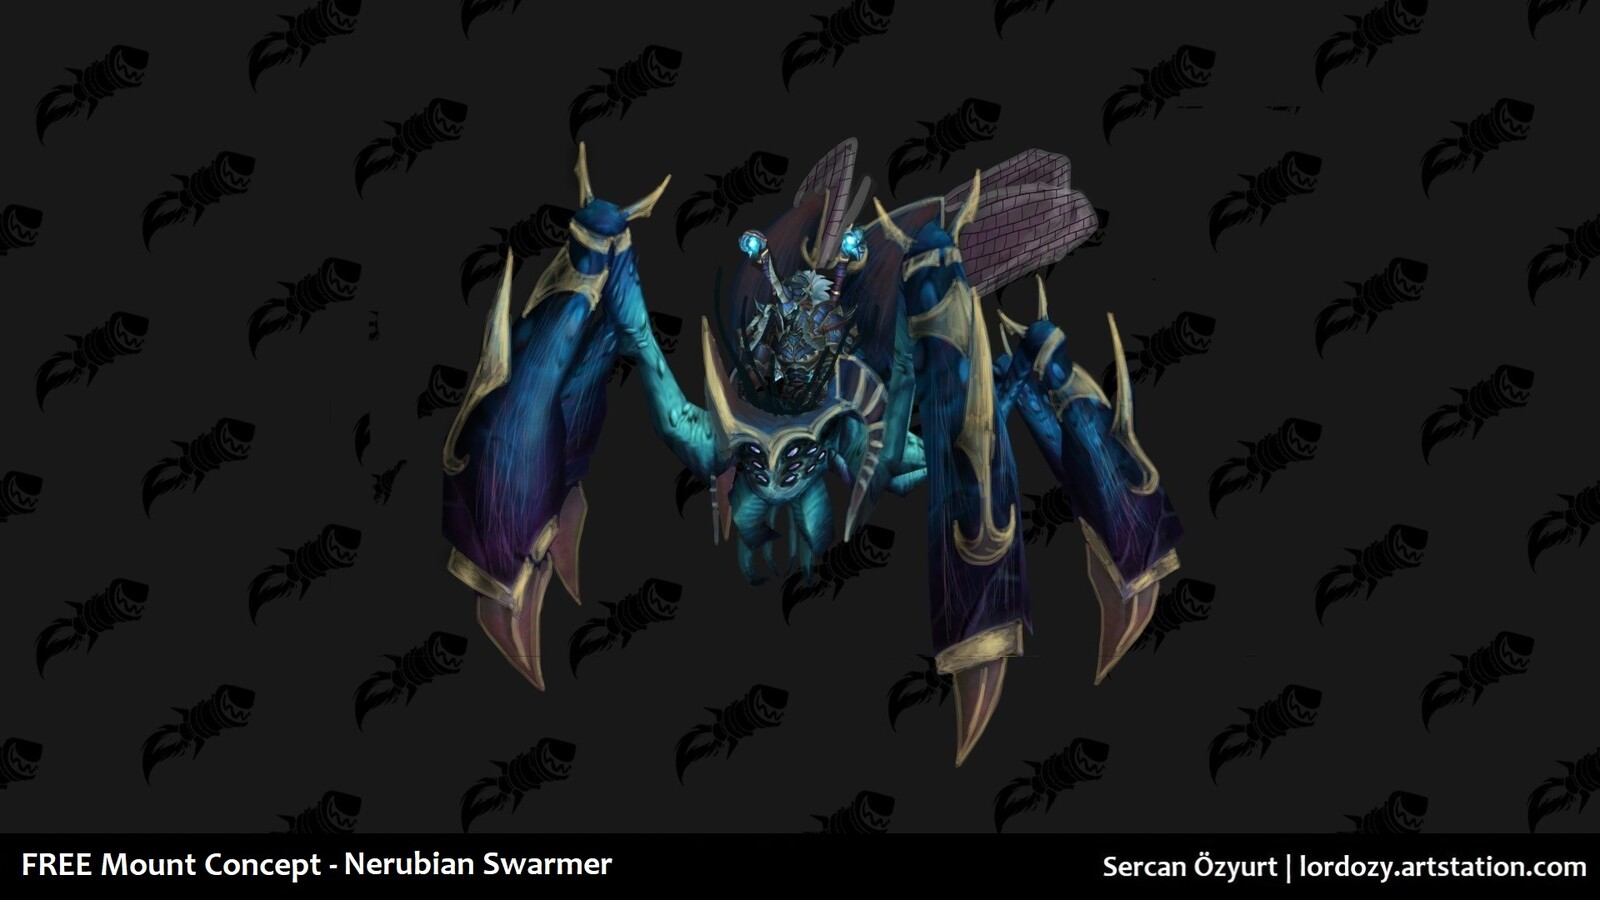 [Fan Concept] Vote for Free Mount Concept - Nerubian Swarmer